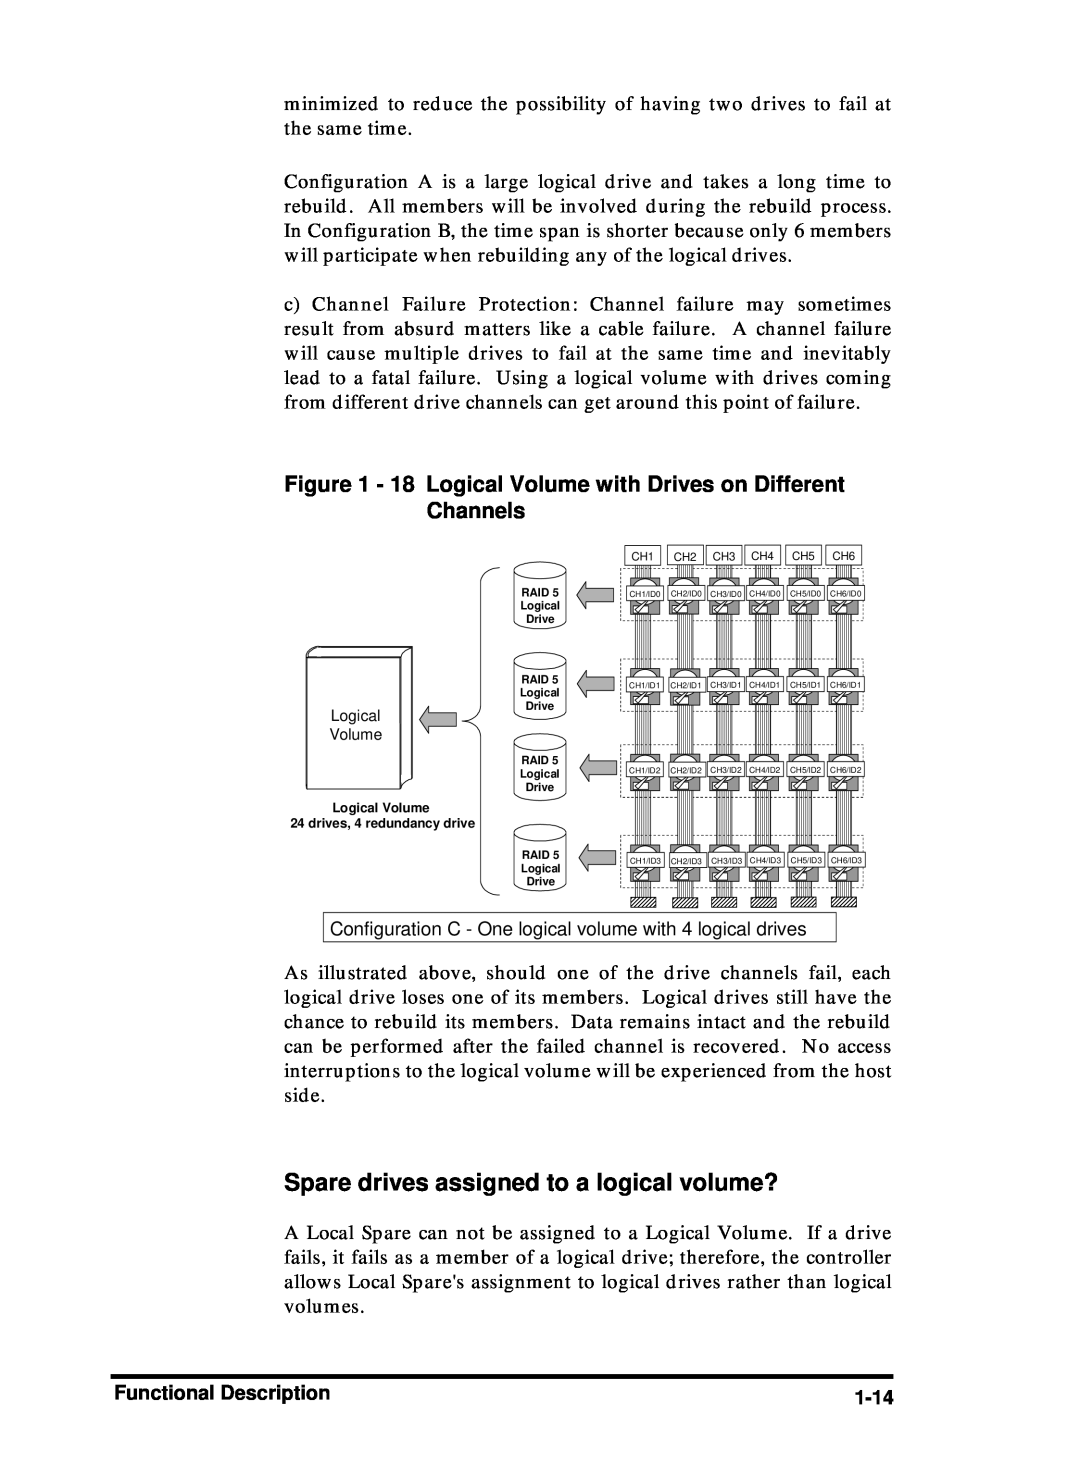 Compaq Infortrend manual Spare drives assigned to a logical volume?, 18 Logical Volume with Drives on Different Channels 